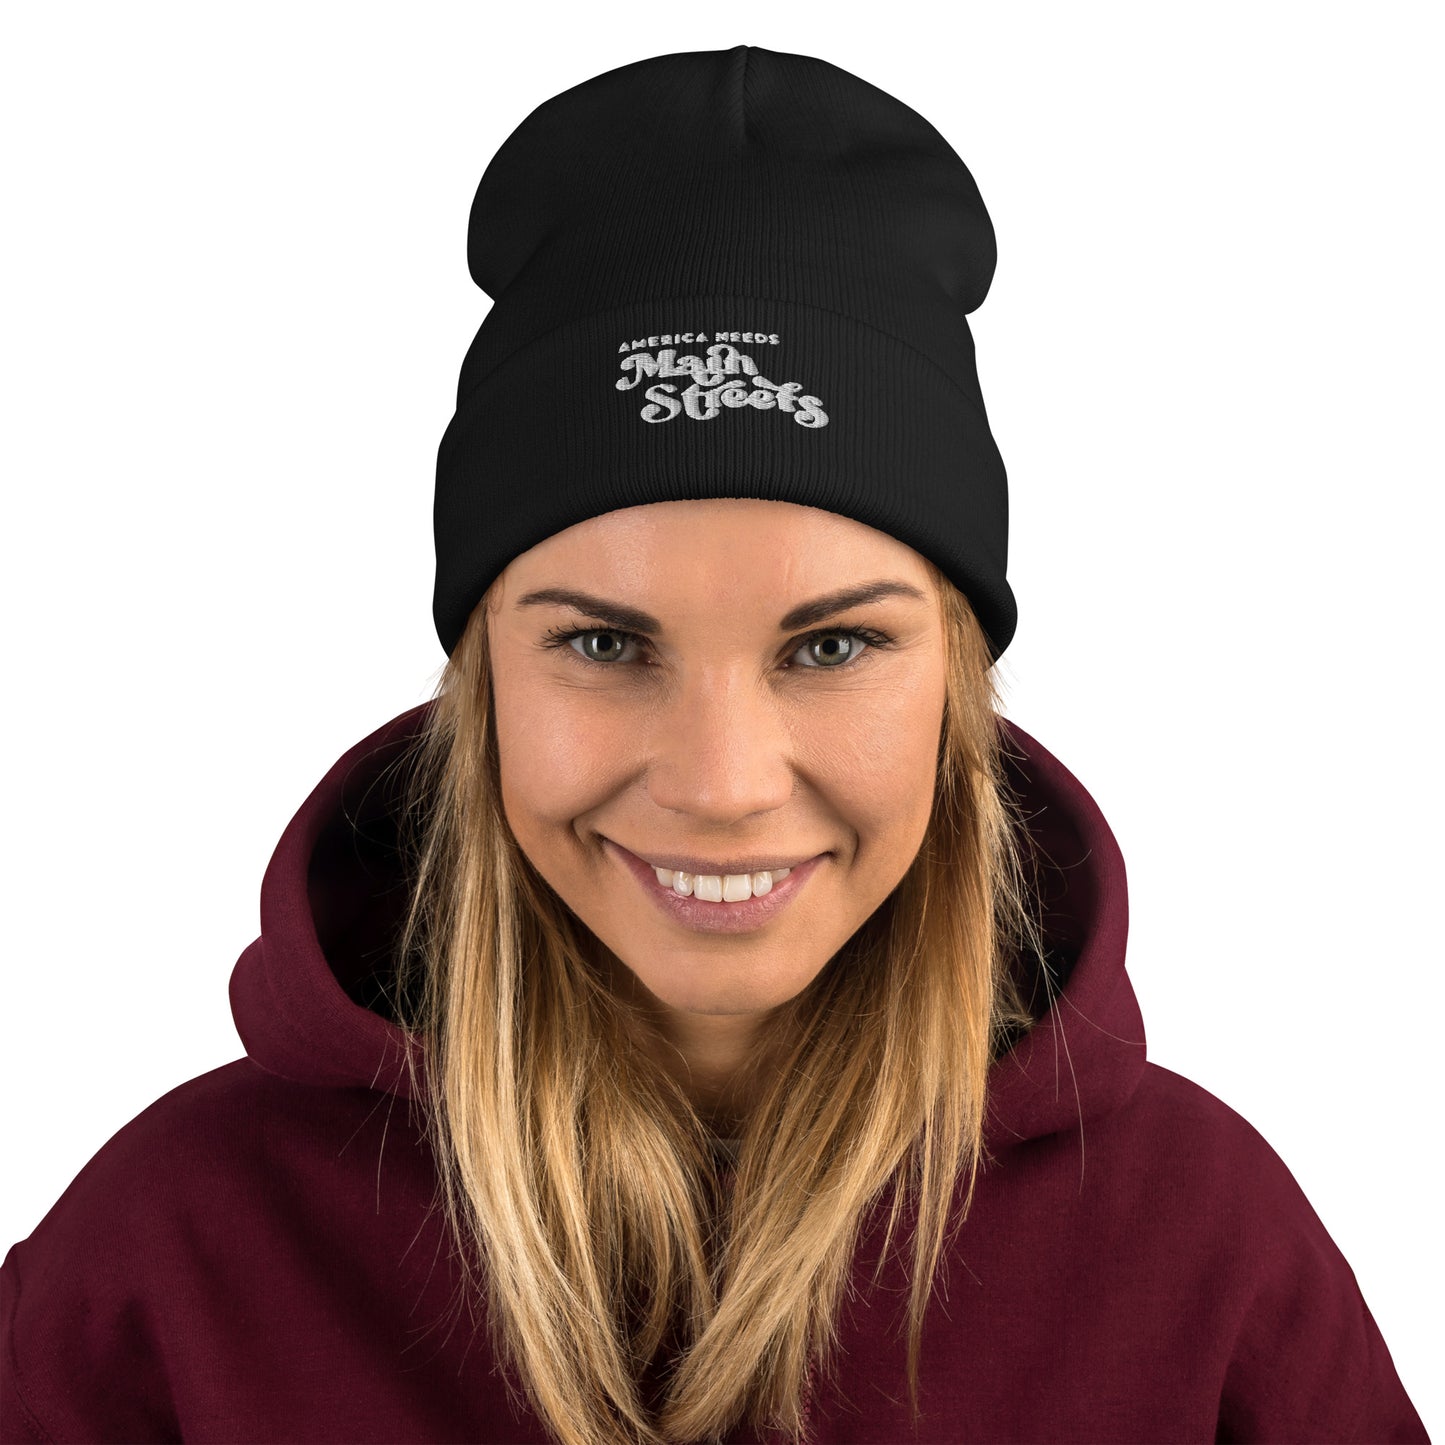 "America Needs Main Streets" Embroidered Beanie